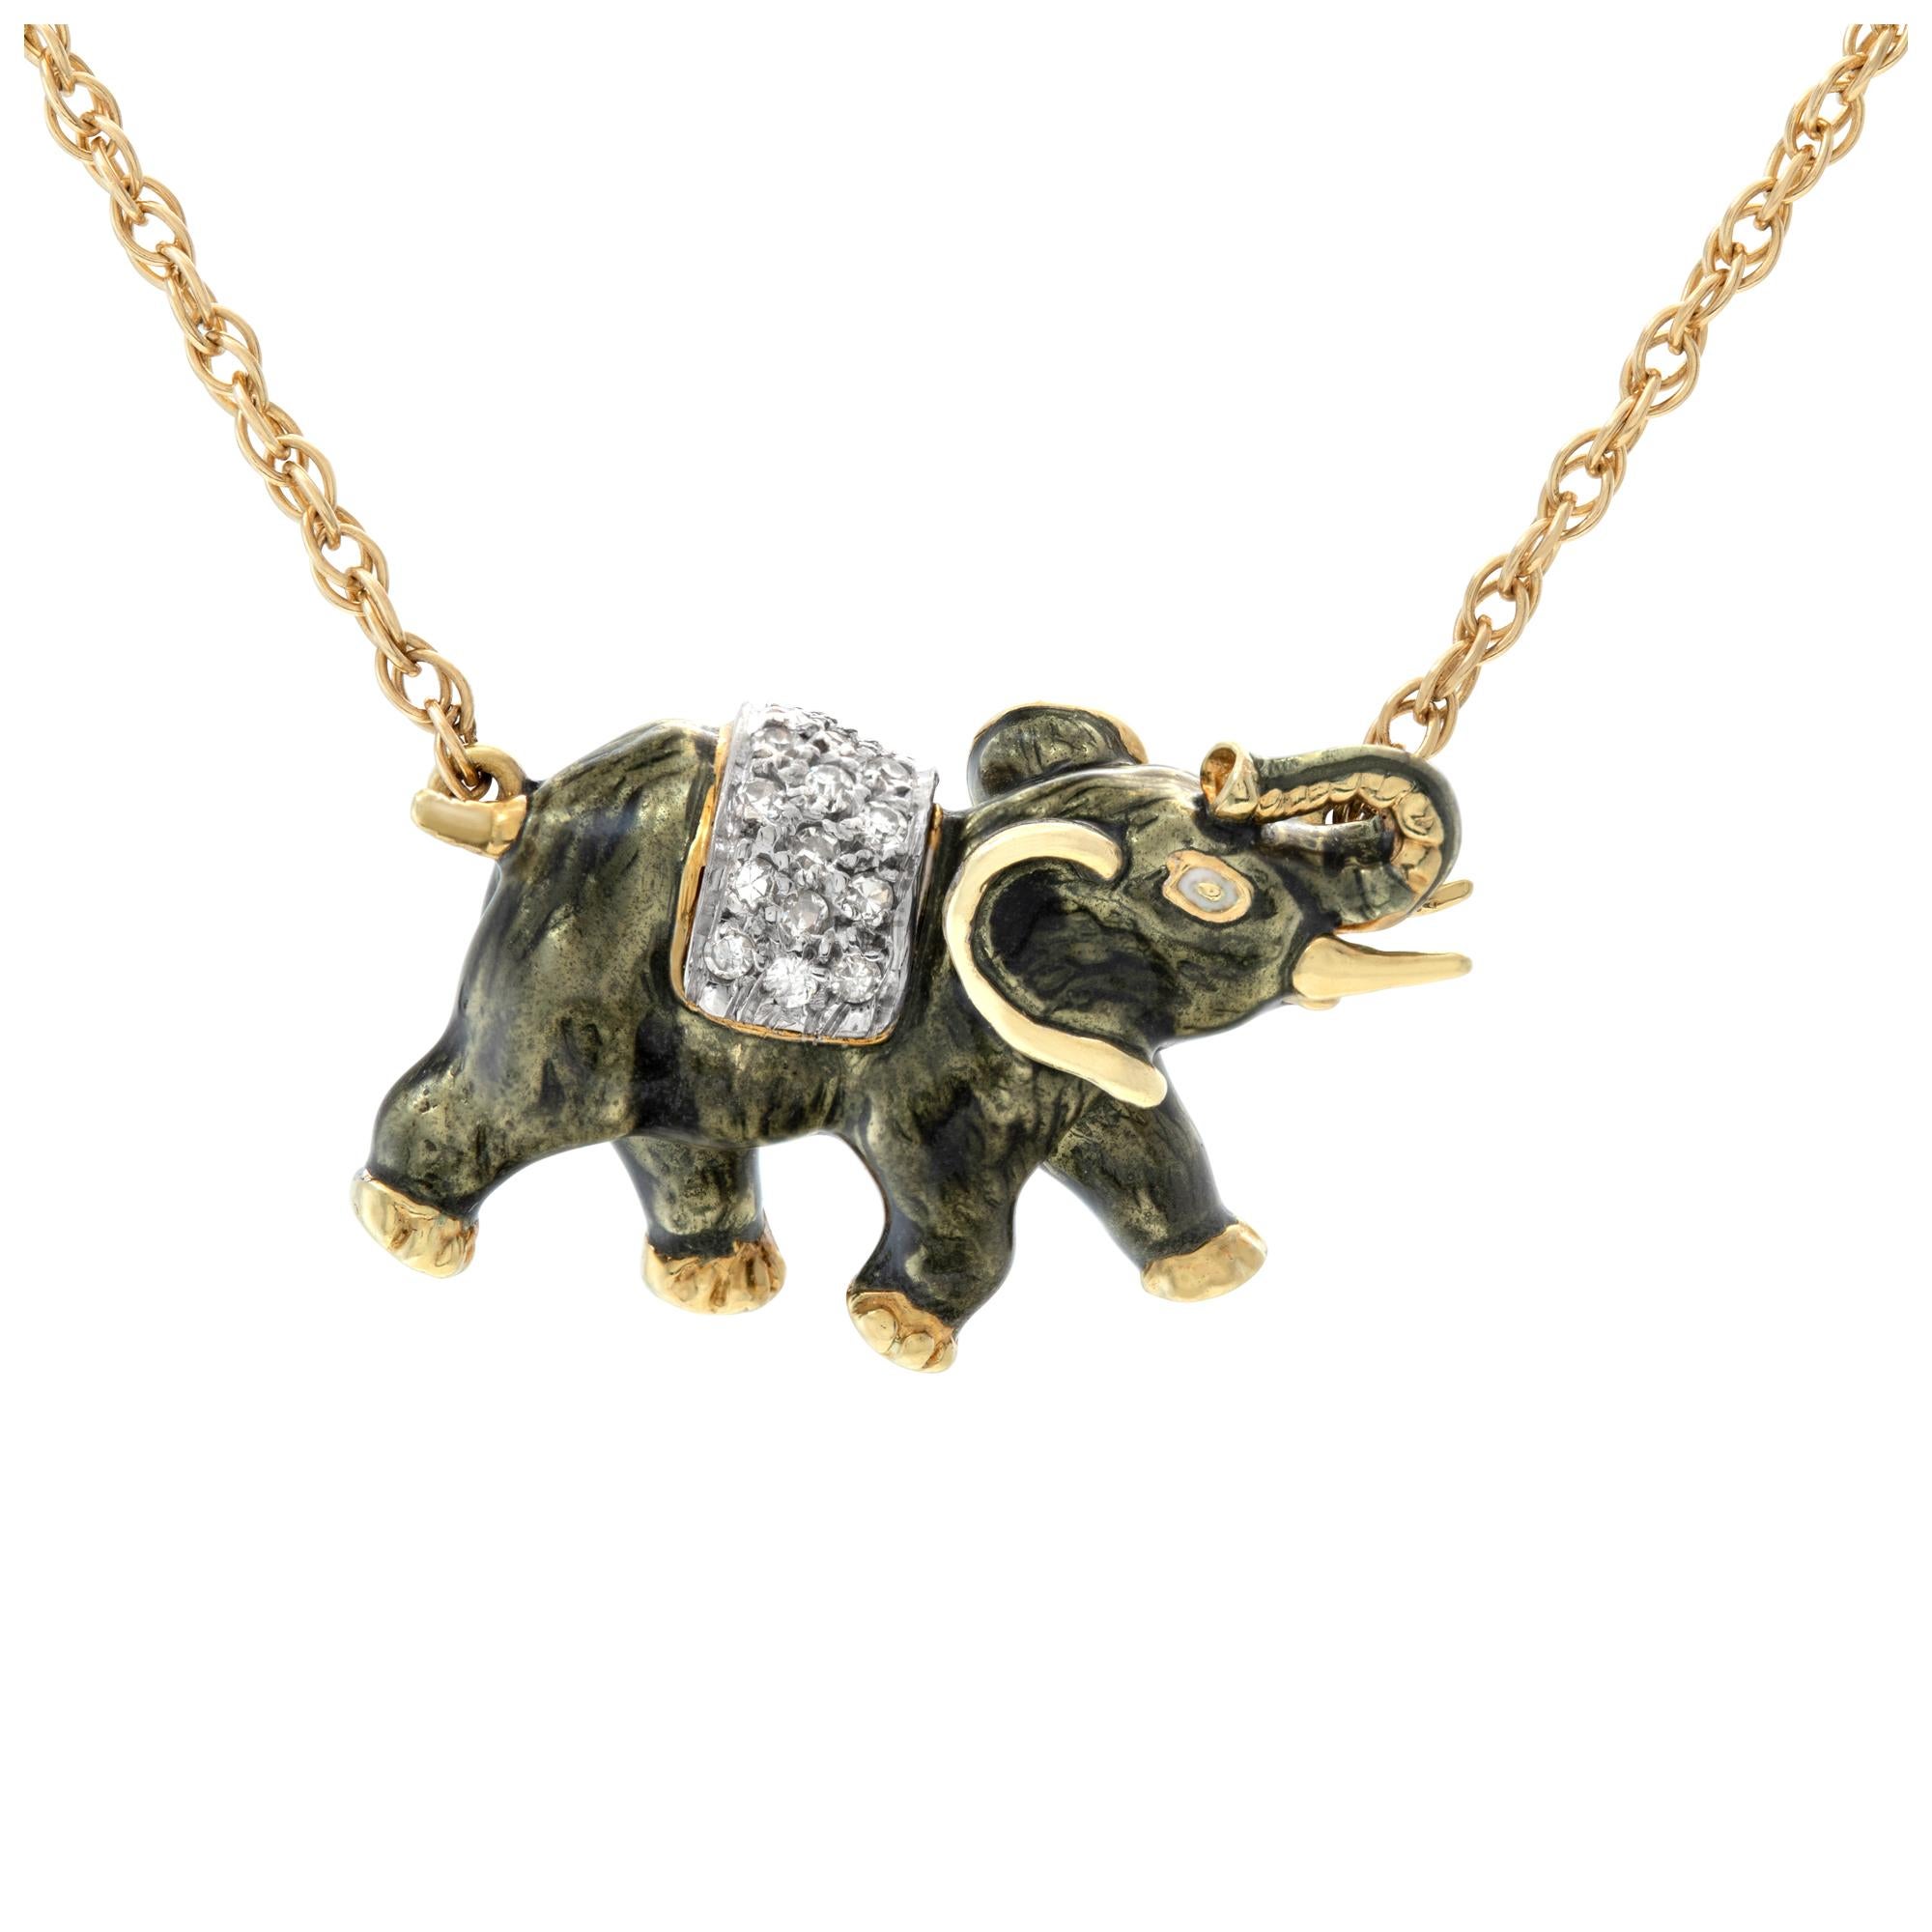 An Elephant necklace in 14k with 0.25 carats in diamond accents G-H color, VS-SI clarity. Length 15 inches.
